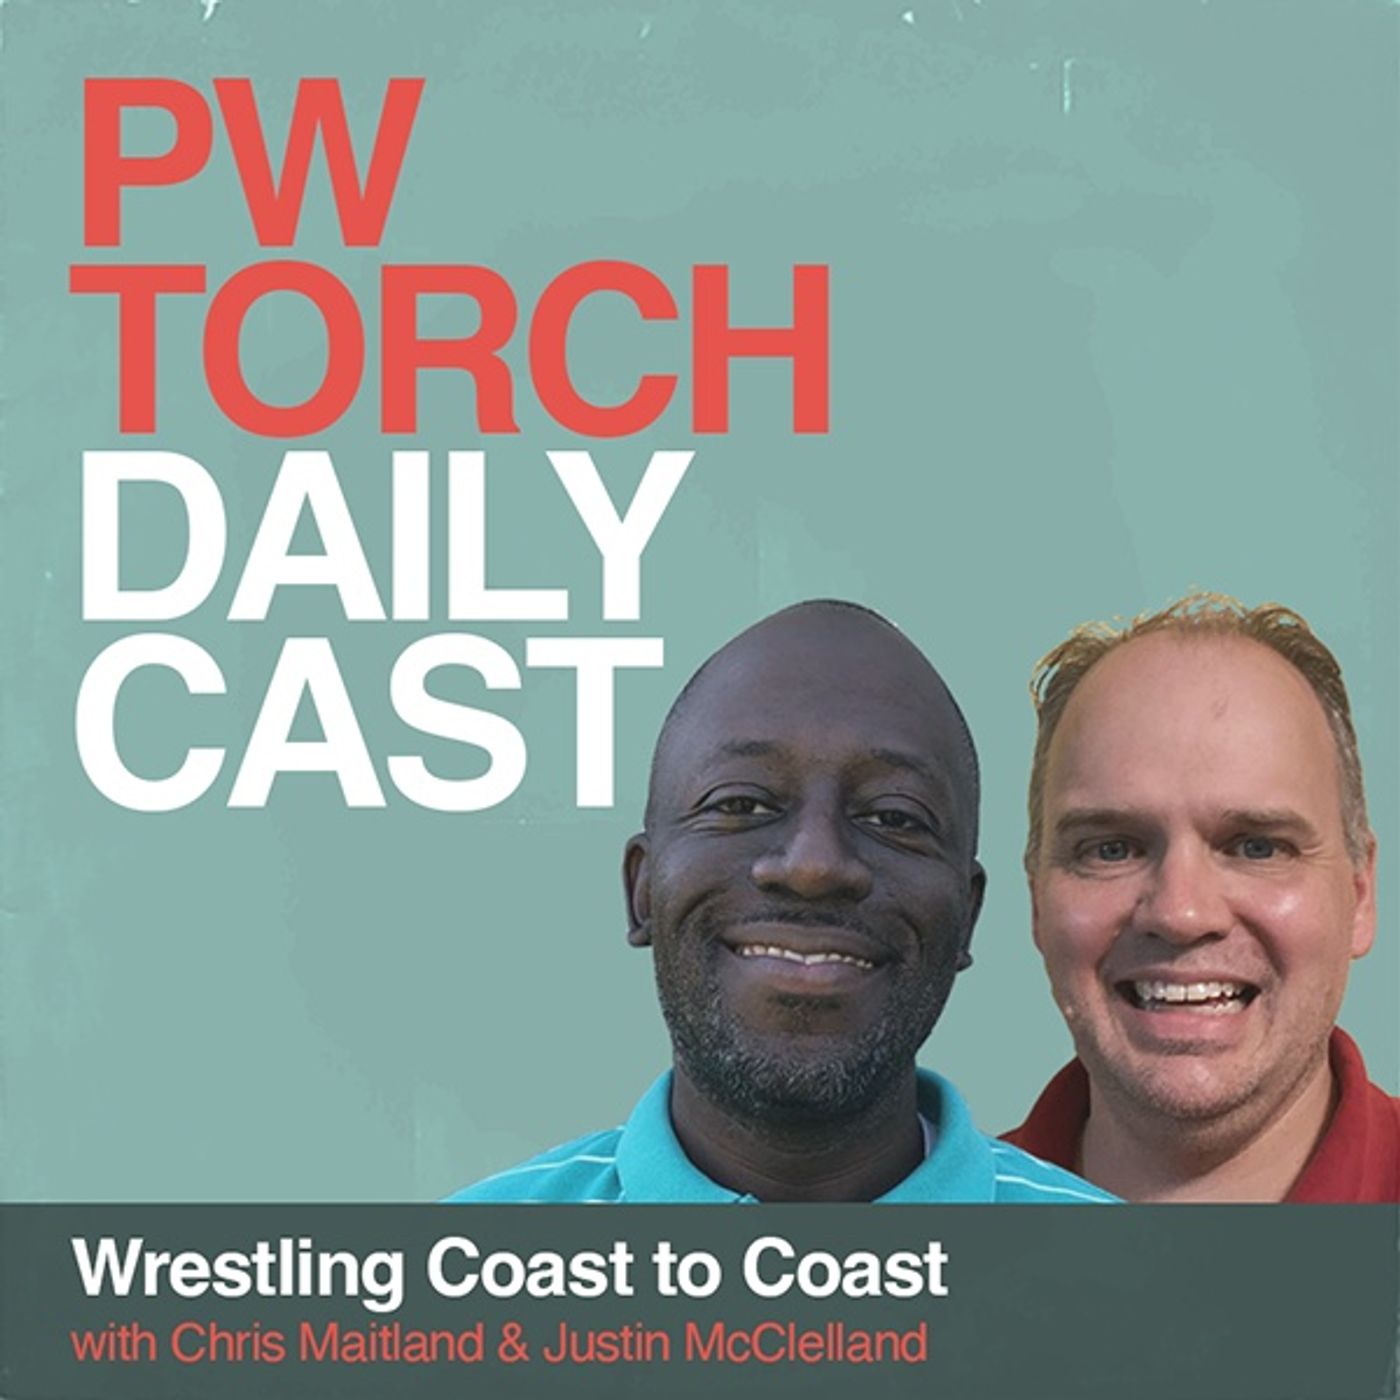 Wrestling Coast to Coast - Maitland & McClelland review ACTION Wrestling's DEAN~!! featuring Makabe vs. Thatcher, Kane vs. Corino, more